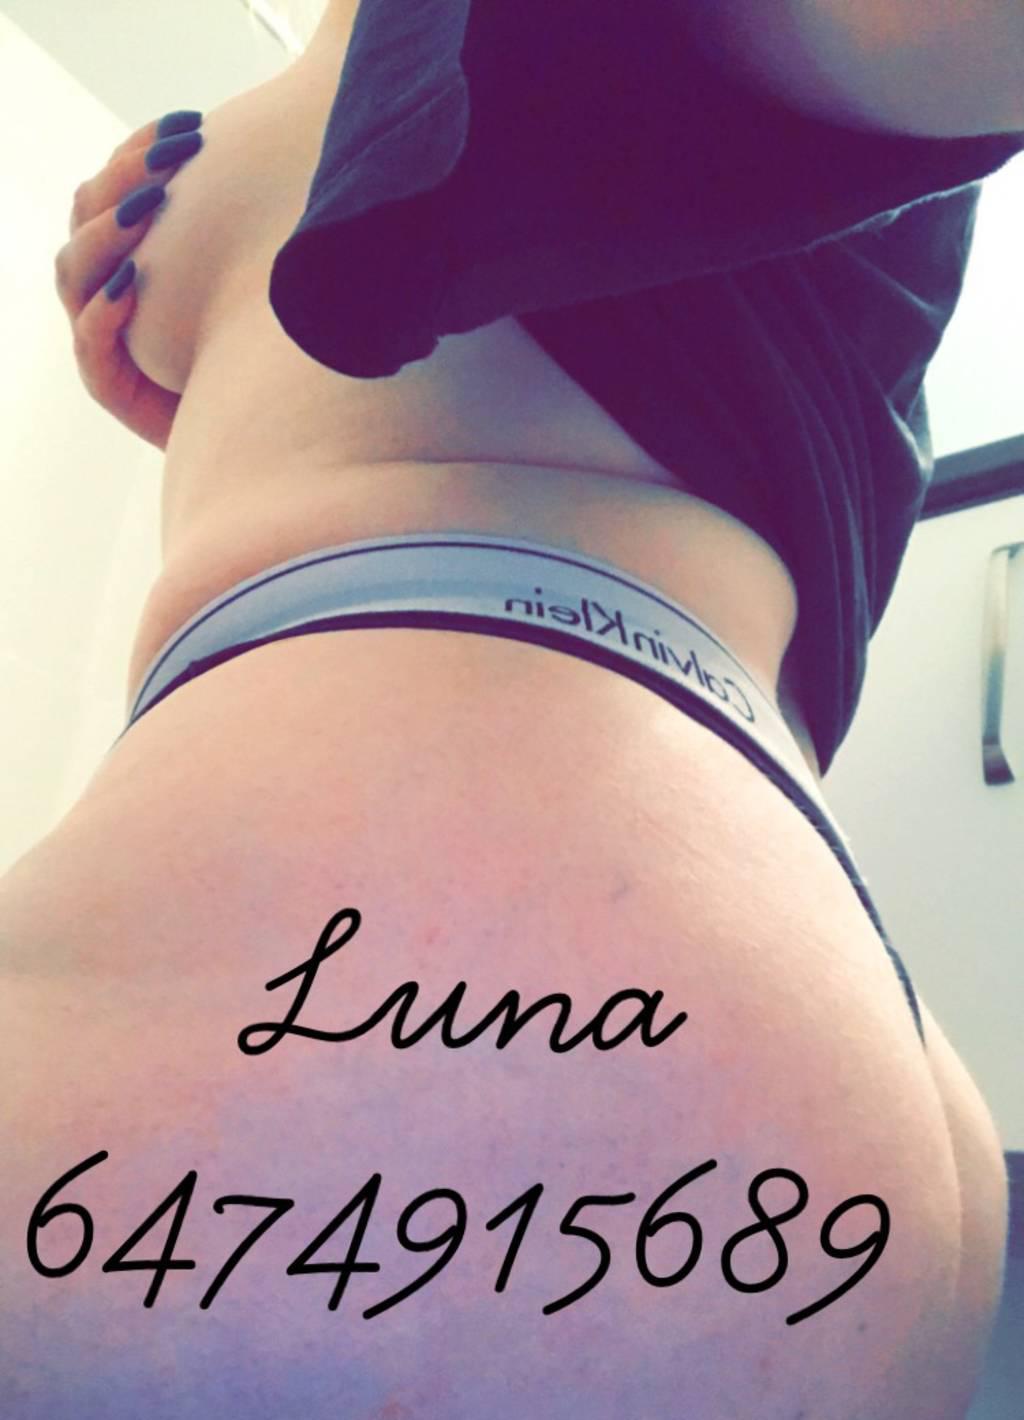 Big booty&Pretty Face Live Shows&DirtyVideos&Skype&Snapchat